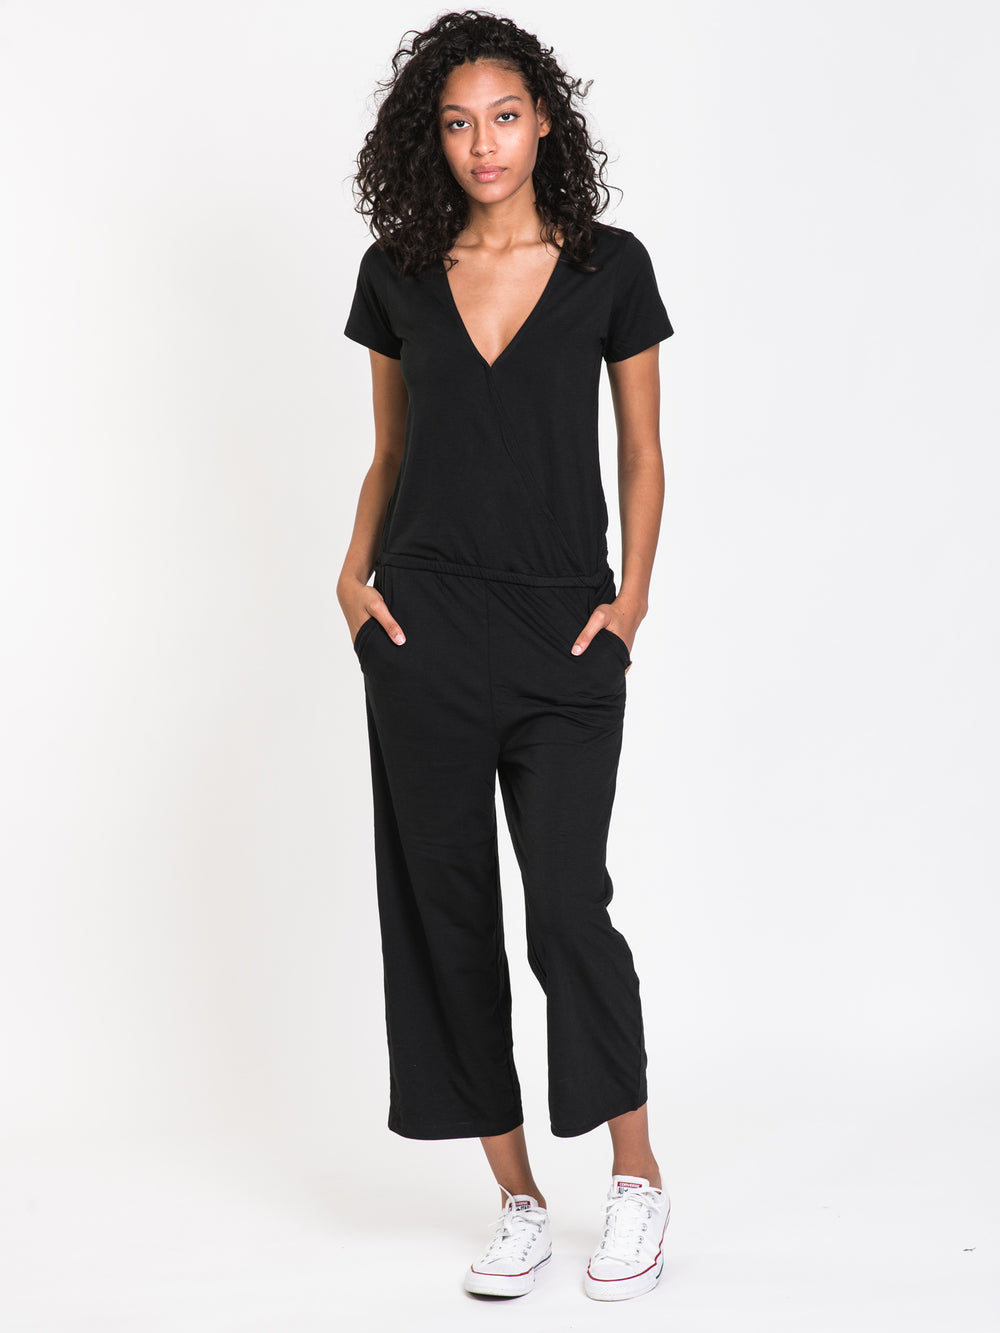 TENTREE BLAKELY SHORT SLEEVE JUMPSUIT - CLEARANCE